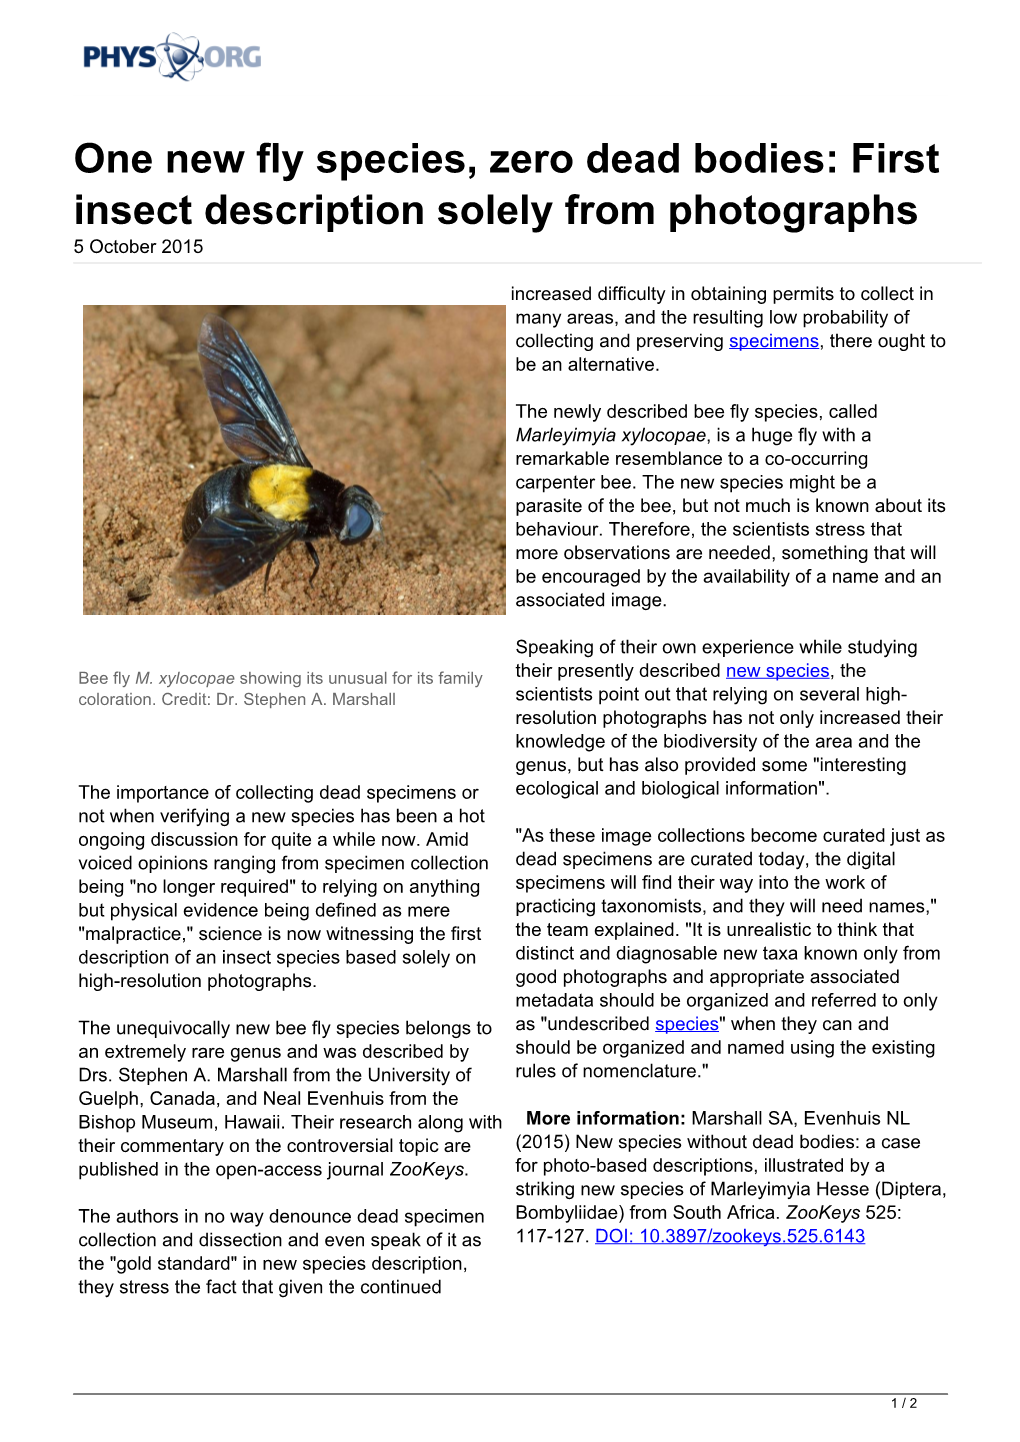 One New Fly Species, Zero Dead Bodies: First Insect Description Solely from Photographs 5 October 2015